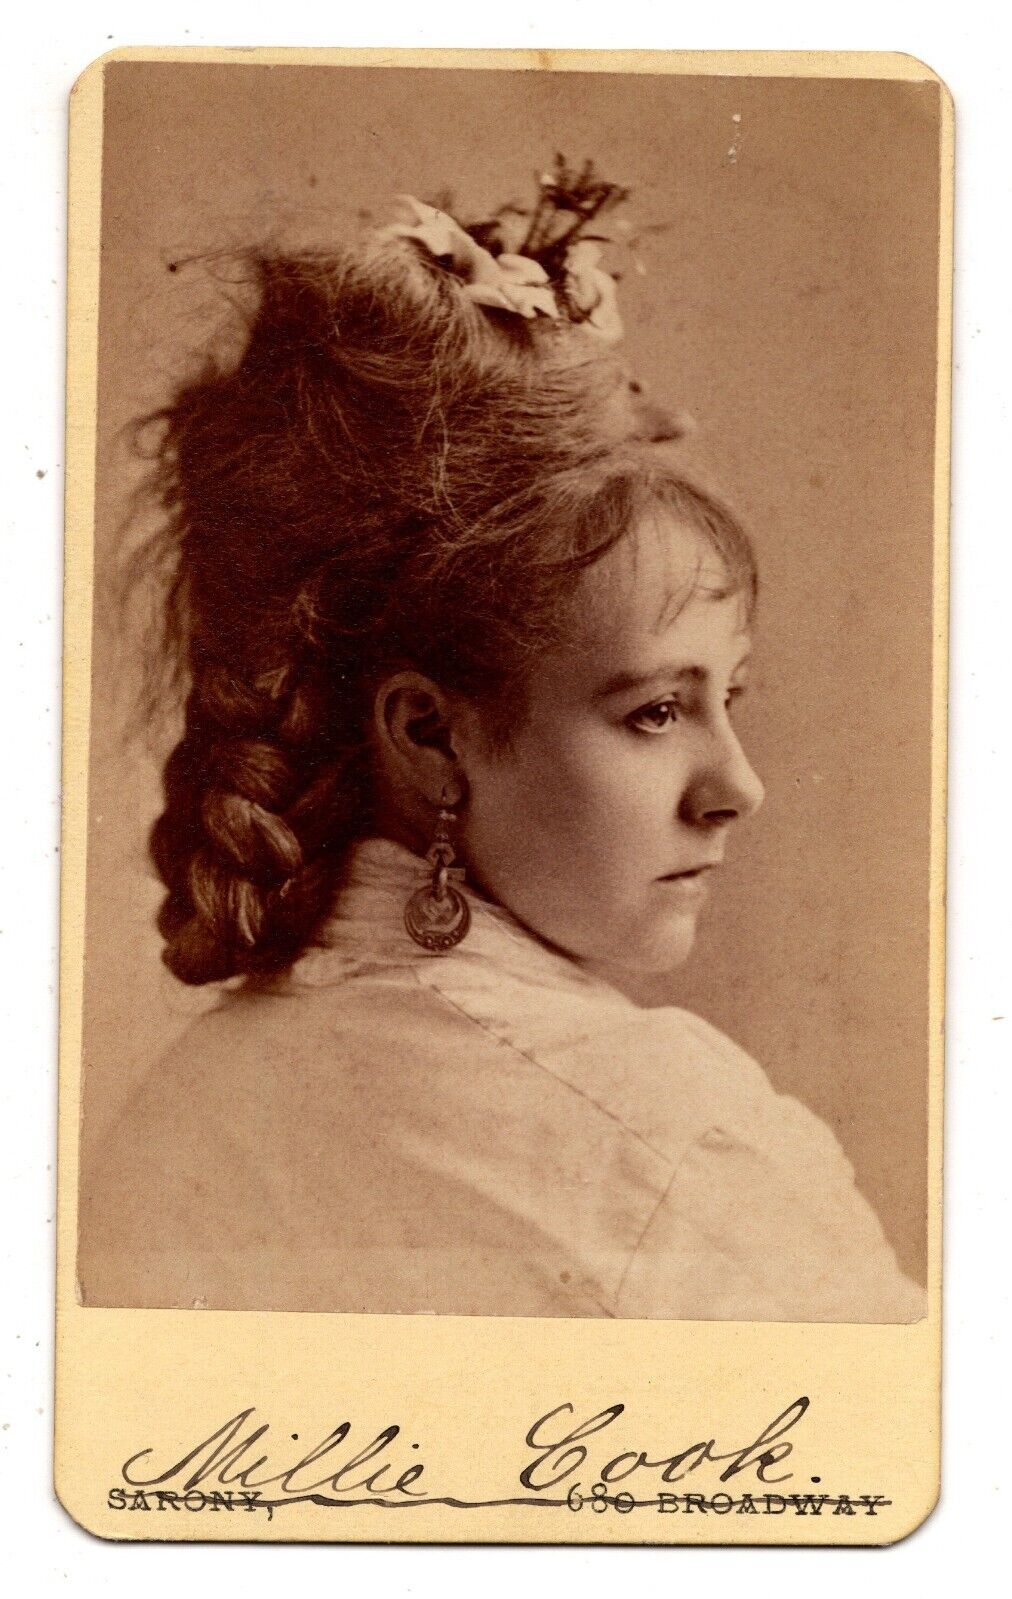 ANTIQUE CDV C. 1870s YOUNG THEATER ACTRESS MILLIE COOK SARONY BROADWAY NEW YORK